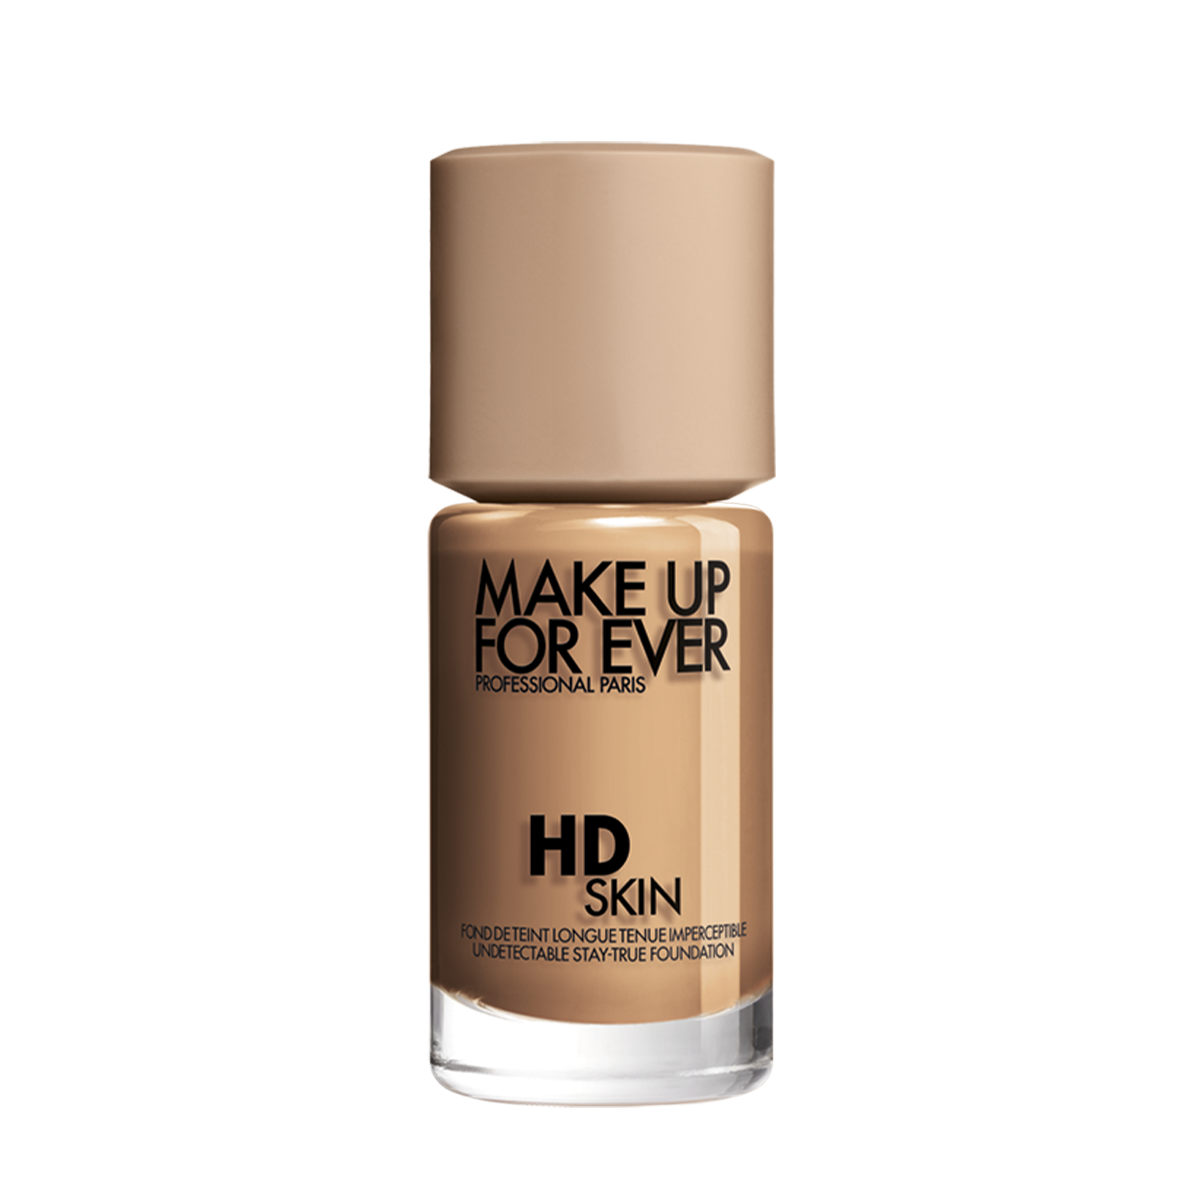 MAKE UP FOR EVER 送料無料 7割　美品 MAKE UP FOR EVERメイクアップフォーエバーHDスキンファンデーション 30ml